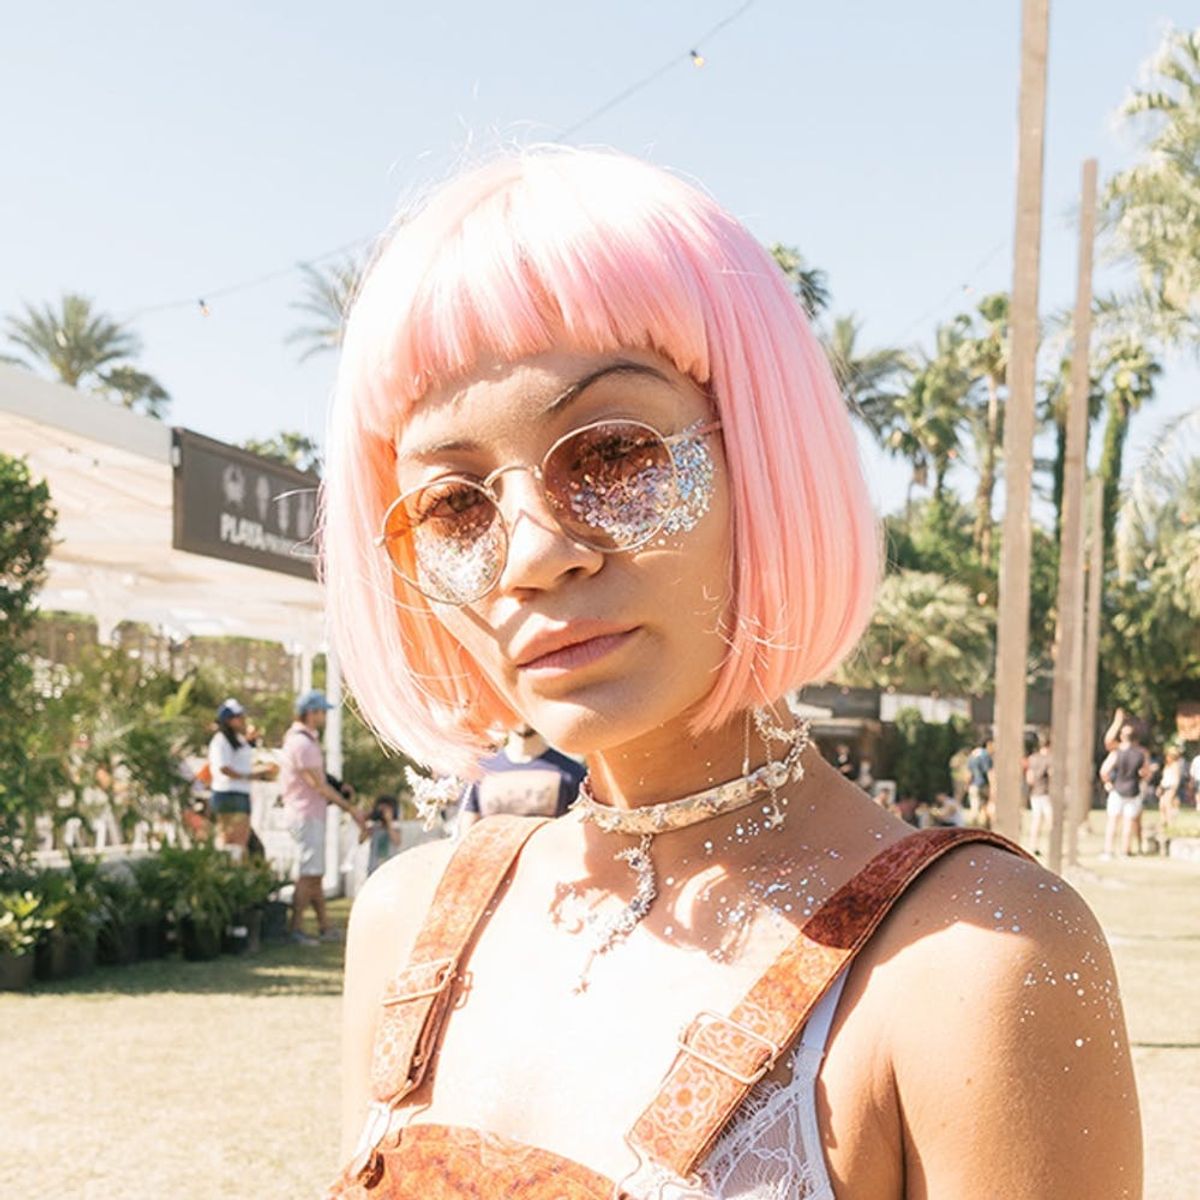 This Crazy New Makeup Trend Is Blowing Up at Coachella